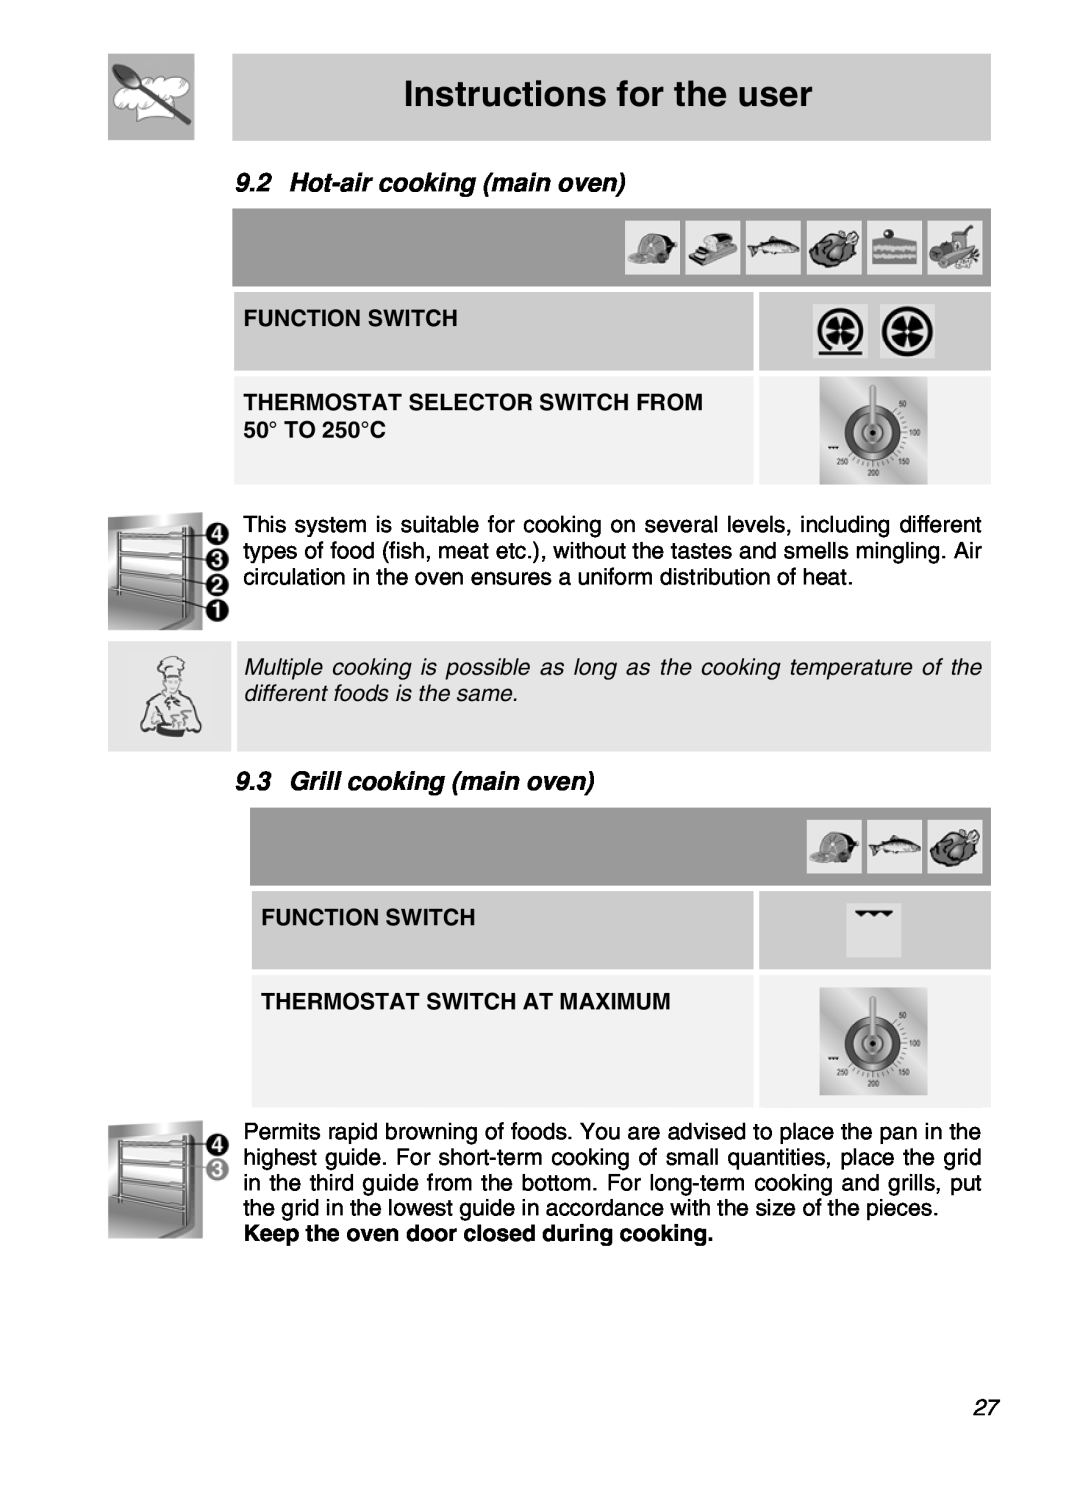 Smeg A3SX manual Hot-aircooking main oven, Grill cooking main oven, Instructions for the user, Function Switch 